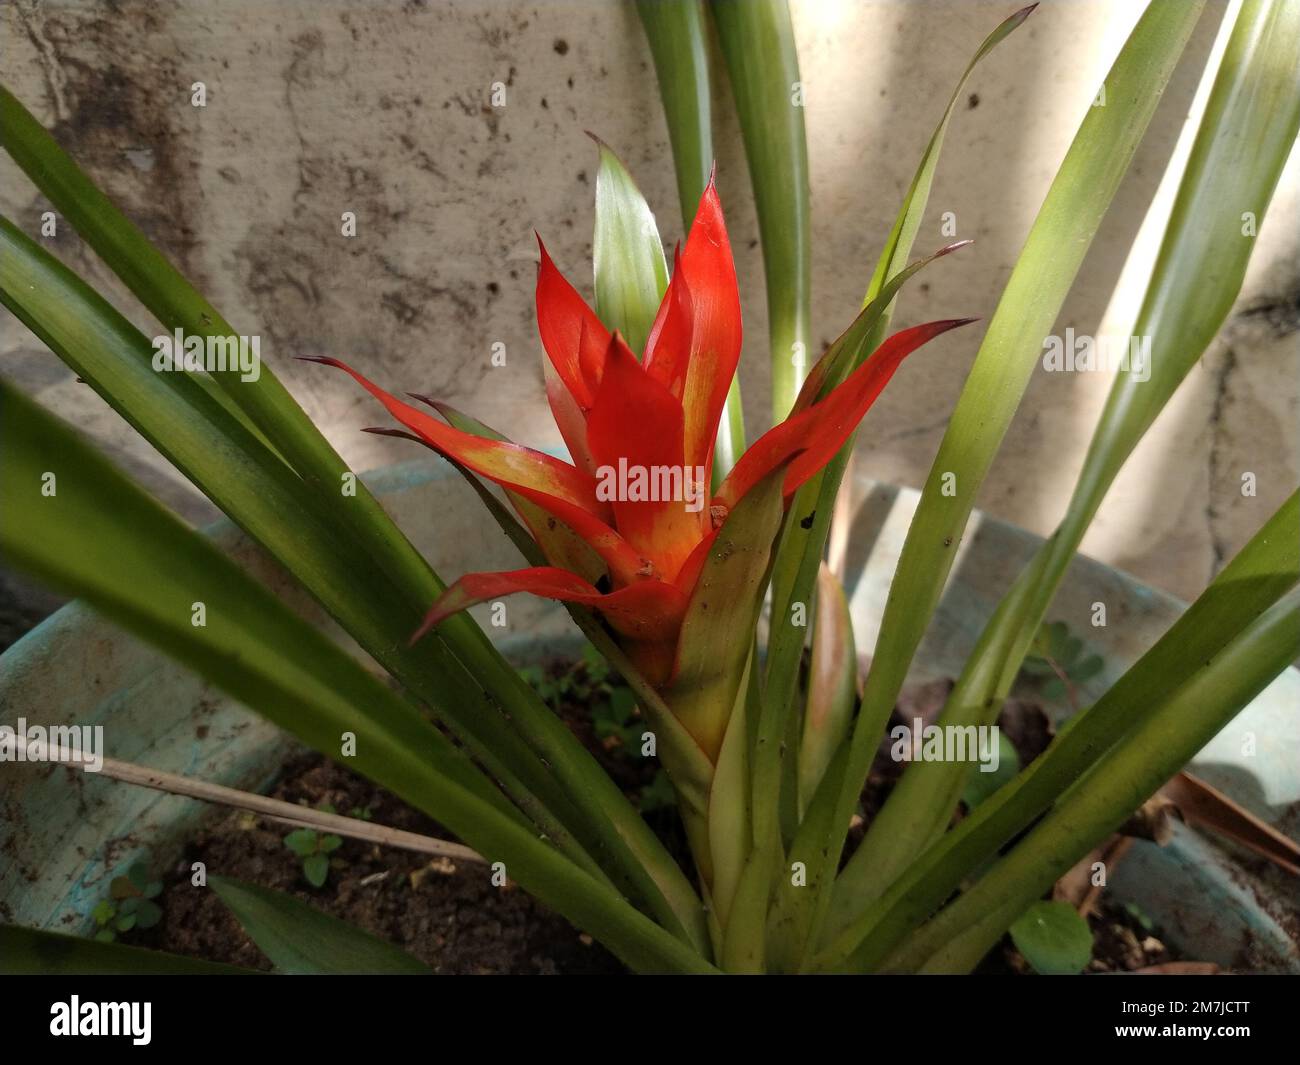 photo of a Bromeliad ornamental plant in a pot. Tropical flower with red and orange petals. Nature environment concept. Stock Photo